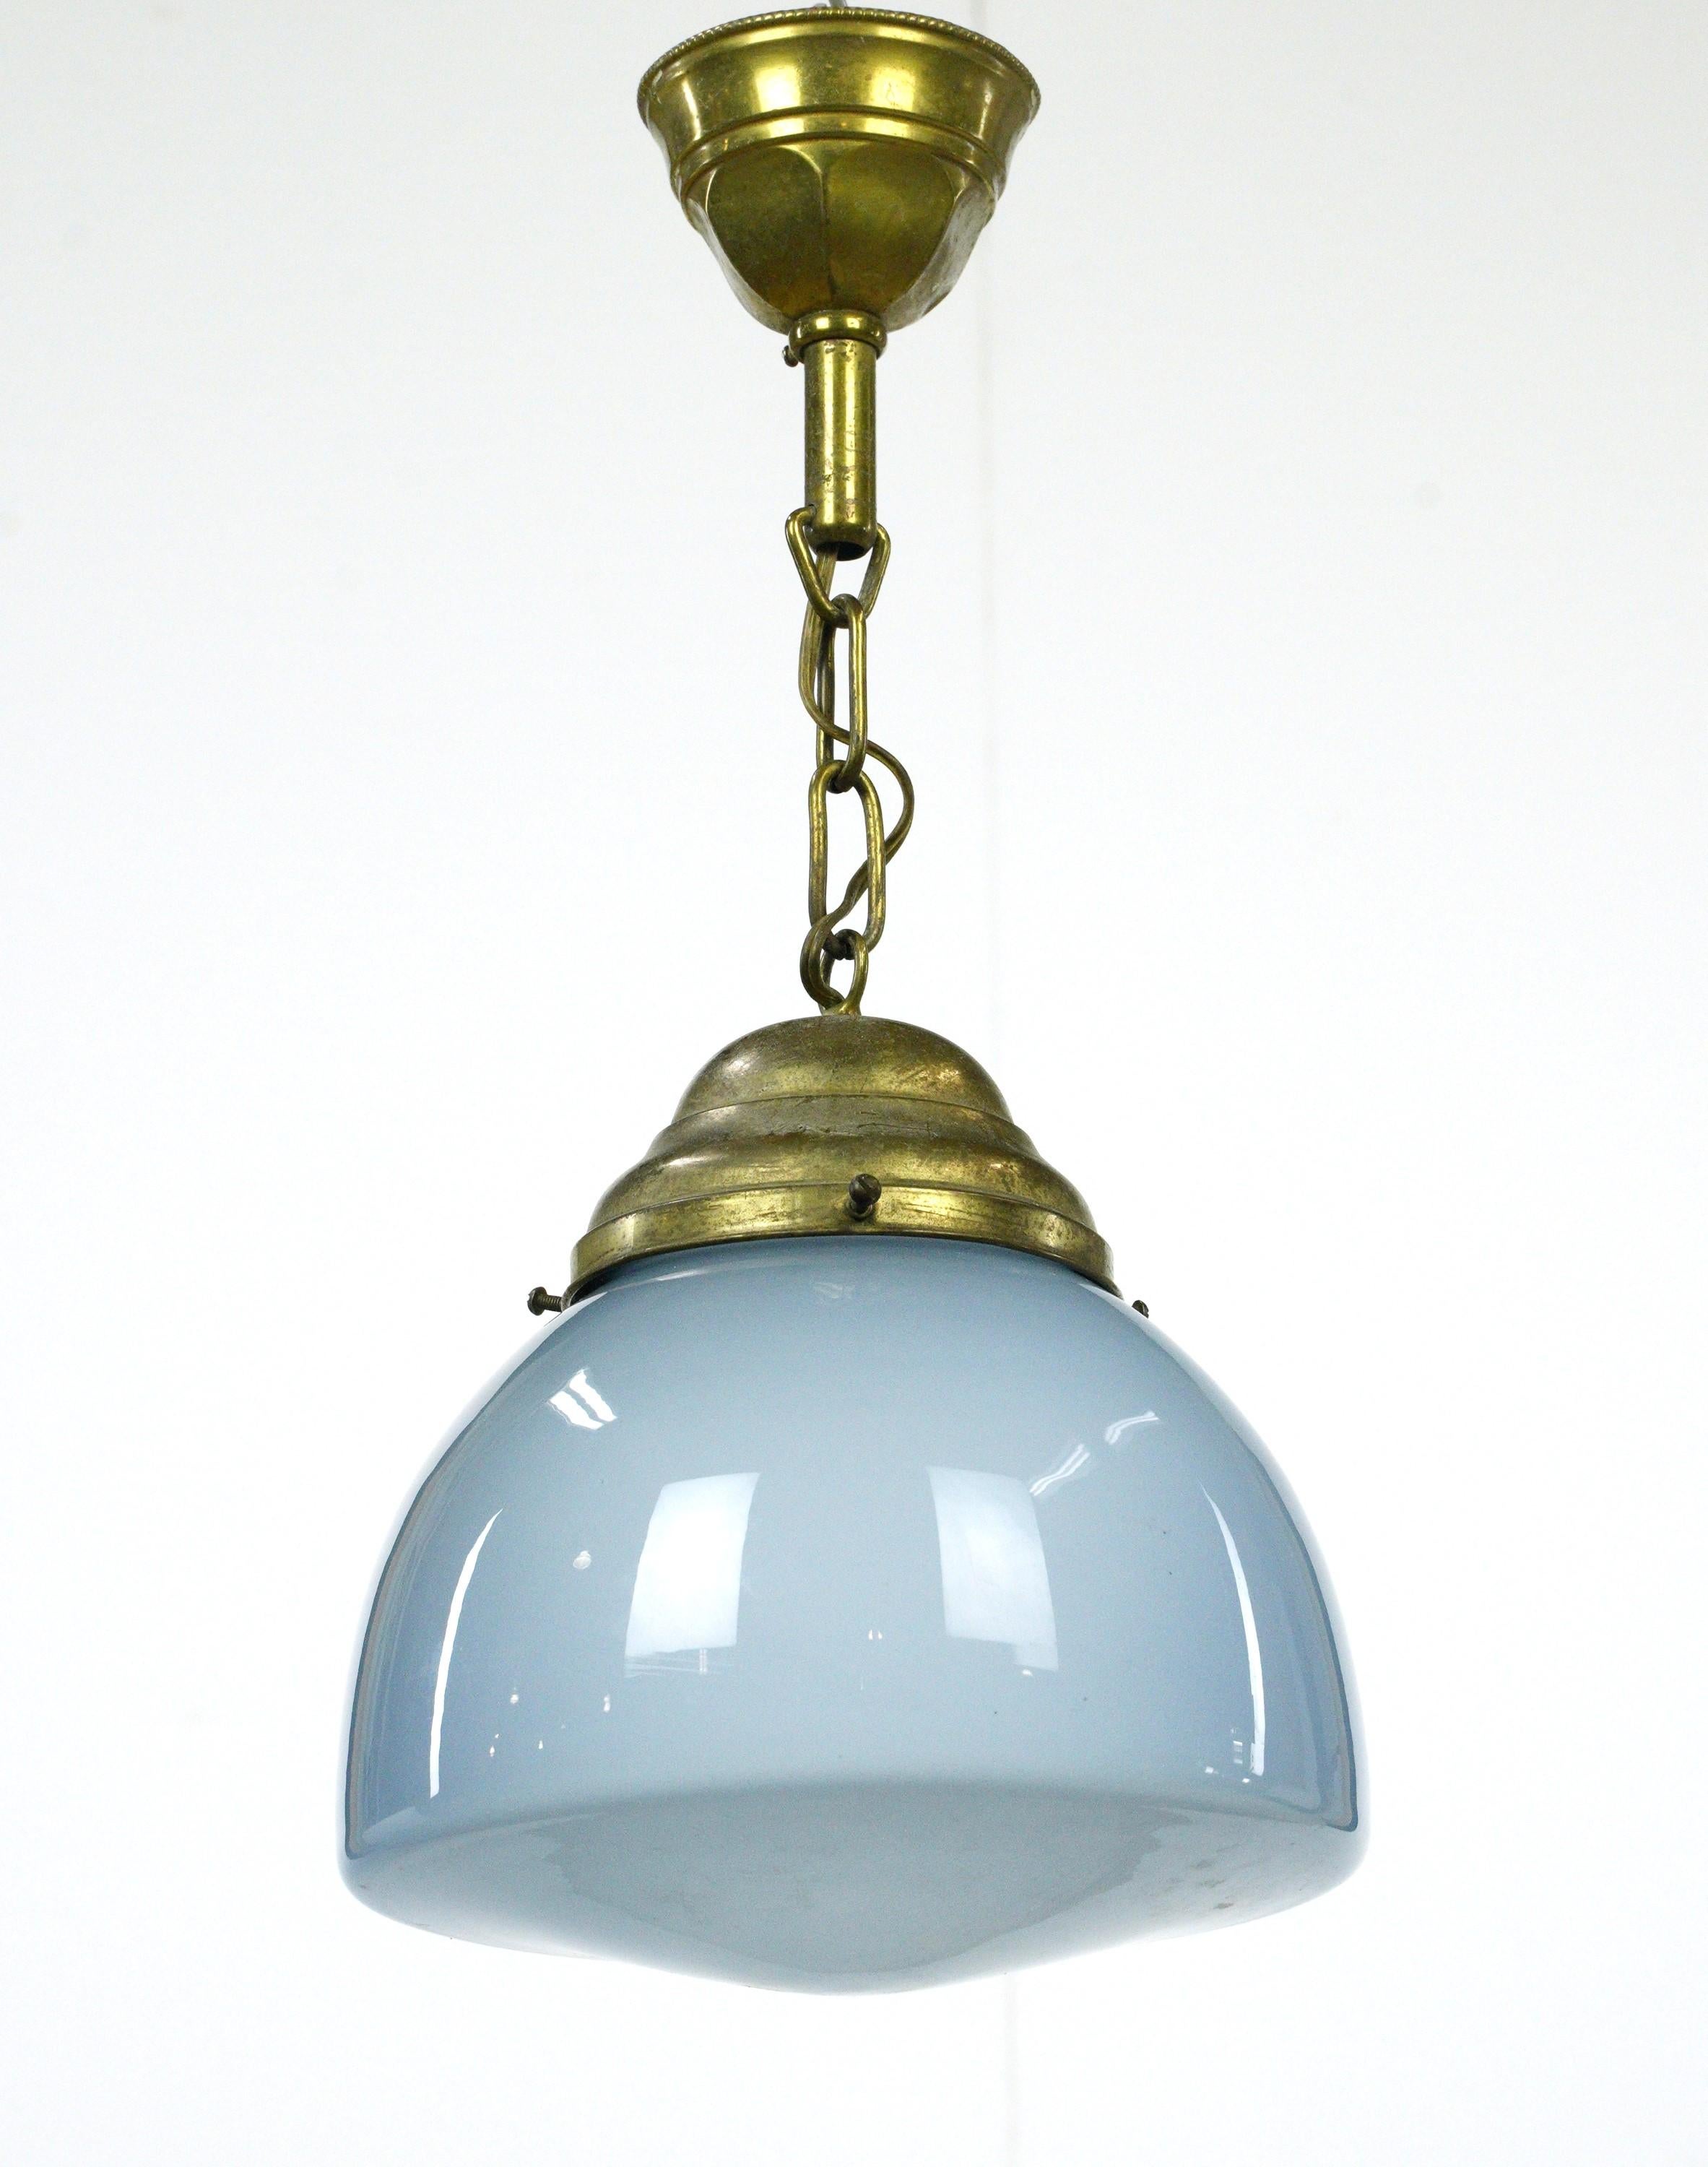 20th Century light blue glass globe pendant light with a brass fitter. This requires one standard medium base bulb. The price includes restoration of cleaning and rewiring. Good condition with appropriate wear from age. One available. Cleaned and